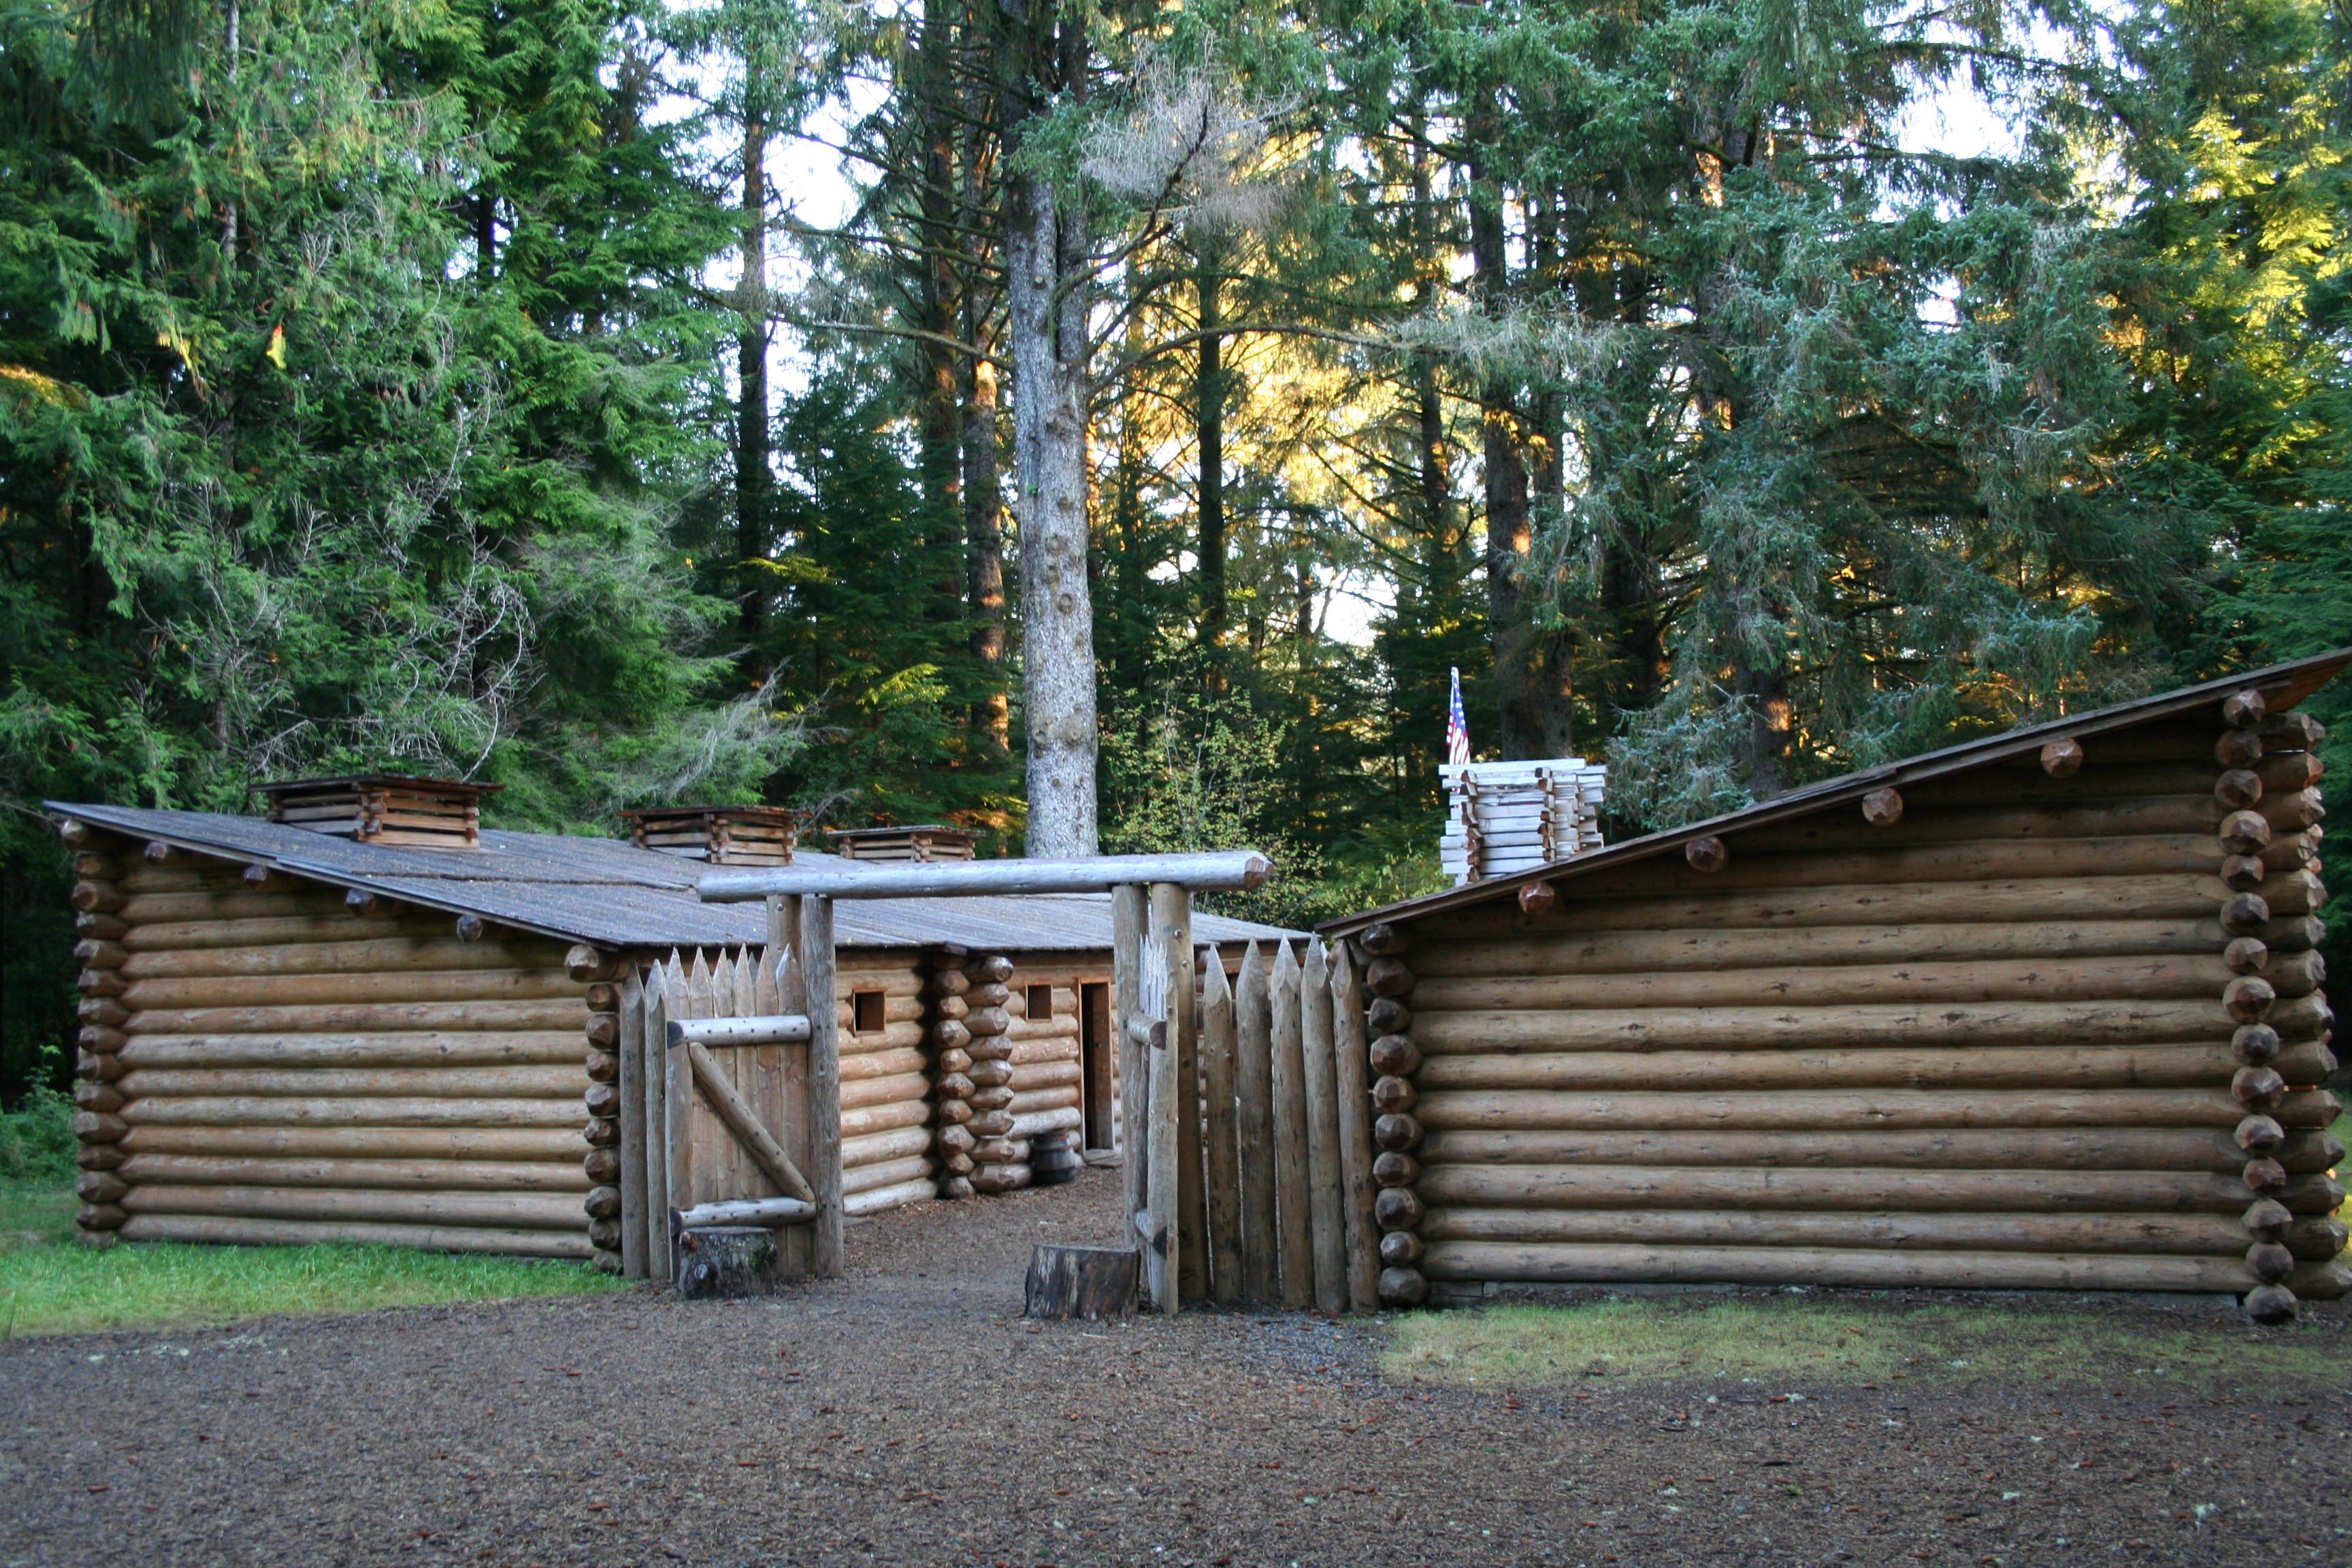 A fifty foot square wooden fort surrounded by tall trees in a forest.